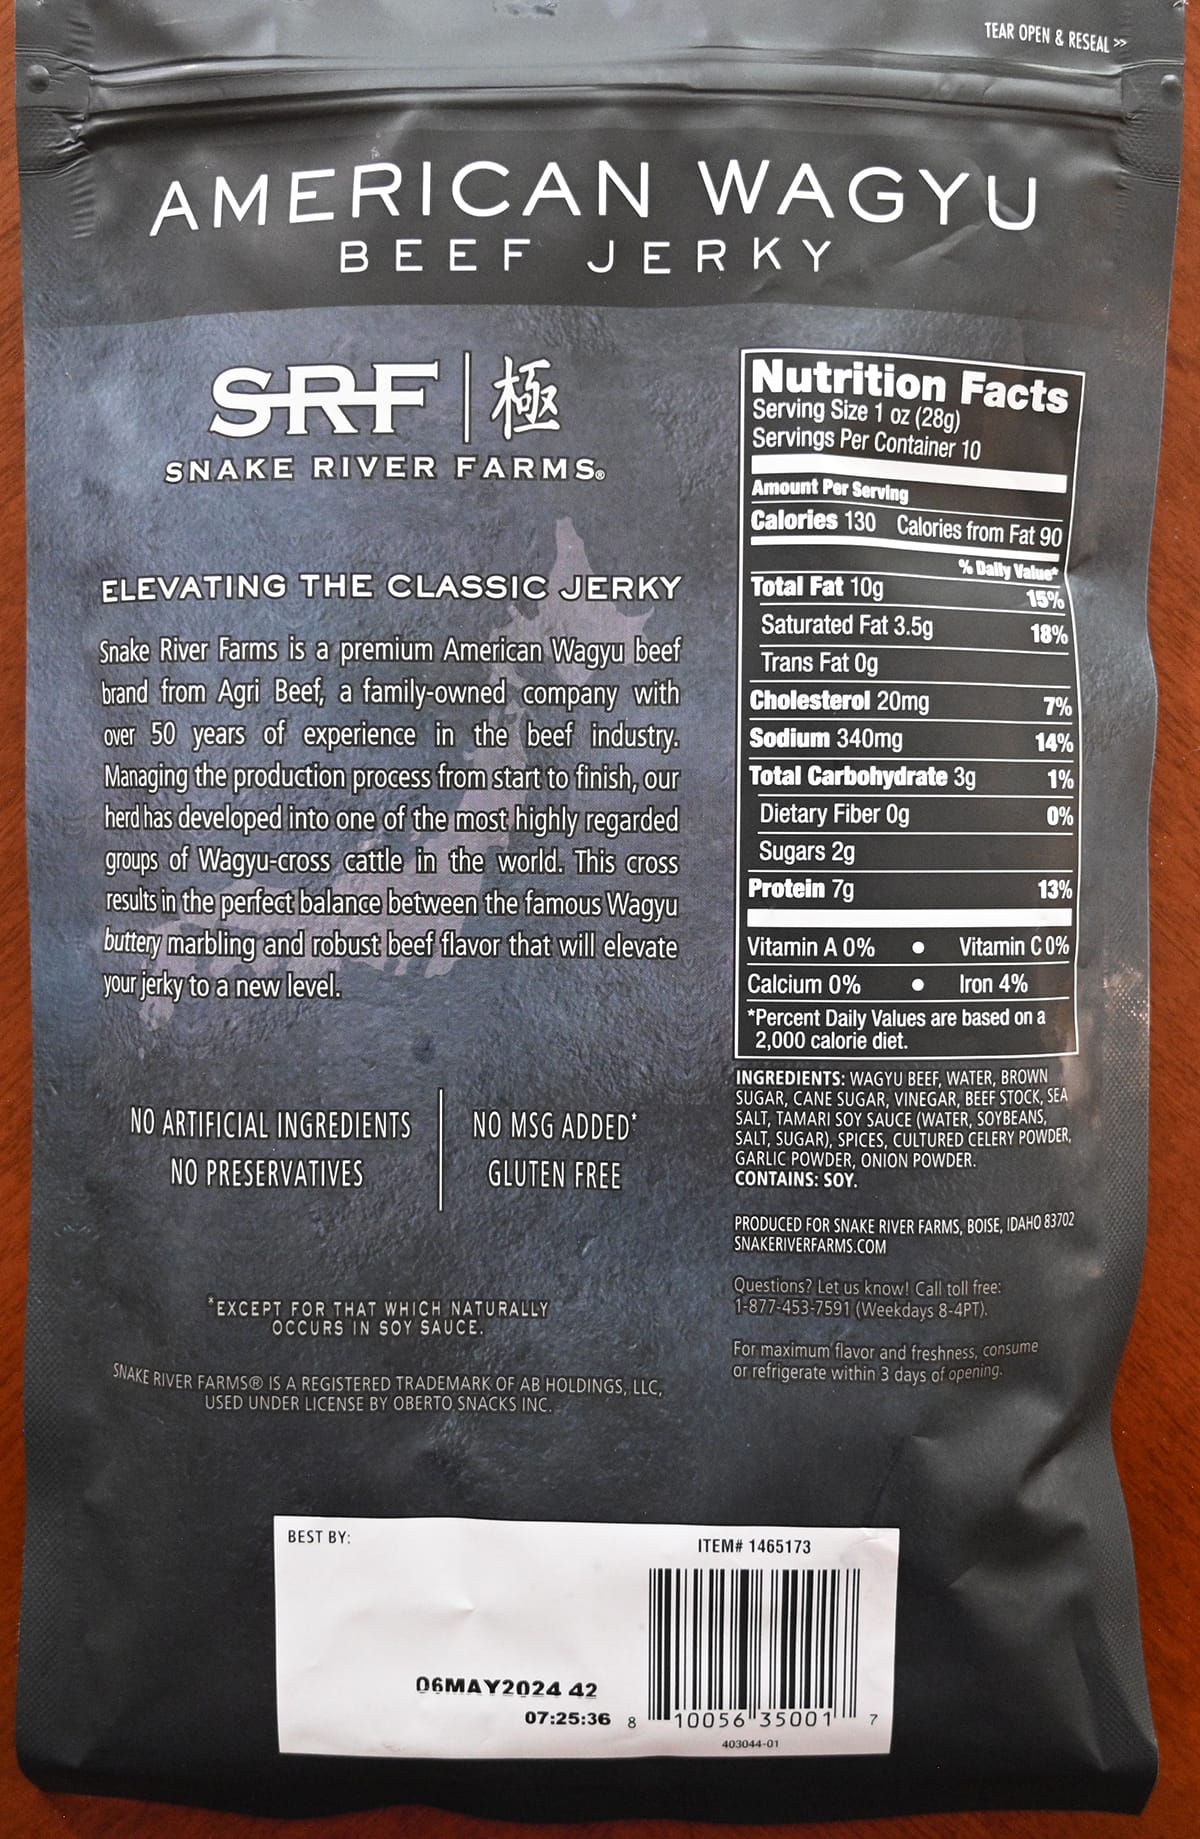 Image of the full back of the bag showing where the jerky is made, nutrition facts, storage instructions and product description.